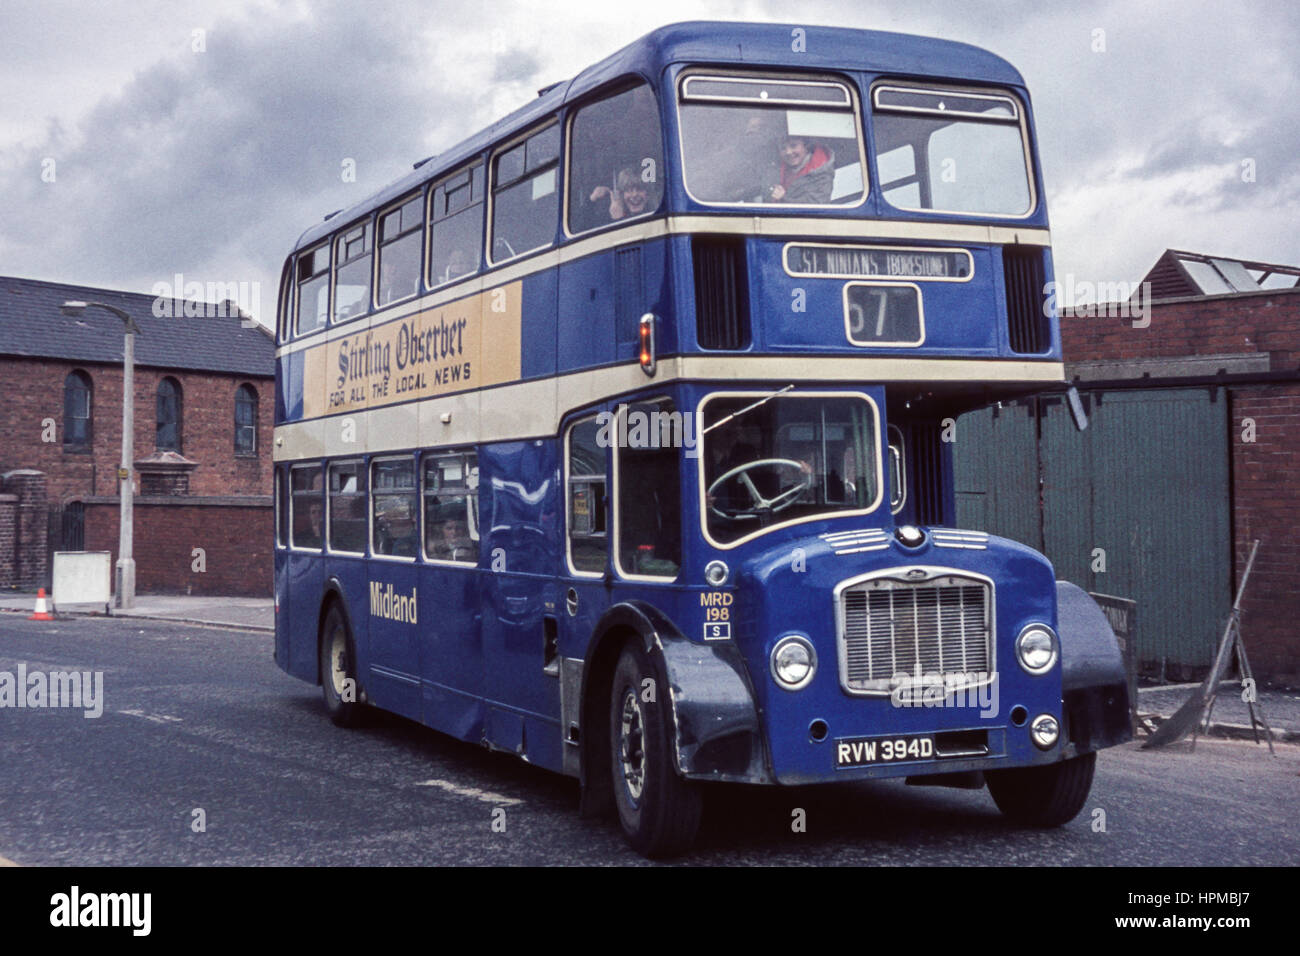 Scotland, UK - 1973: Vintage image of bus.  Eastern National  Lodekka MRD198 operated by Alexander Midland (registration number RVW 394D).  There are children making gestures from the top deck. Stock Photo